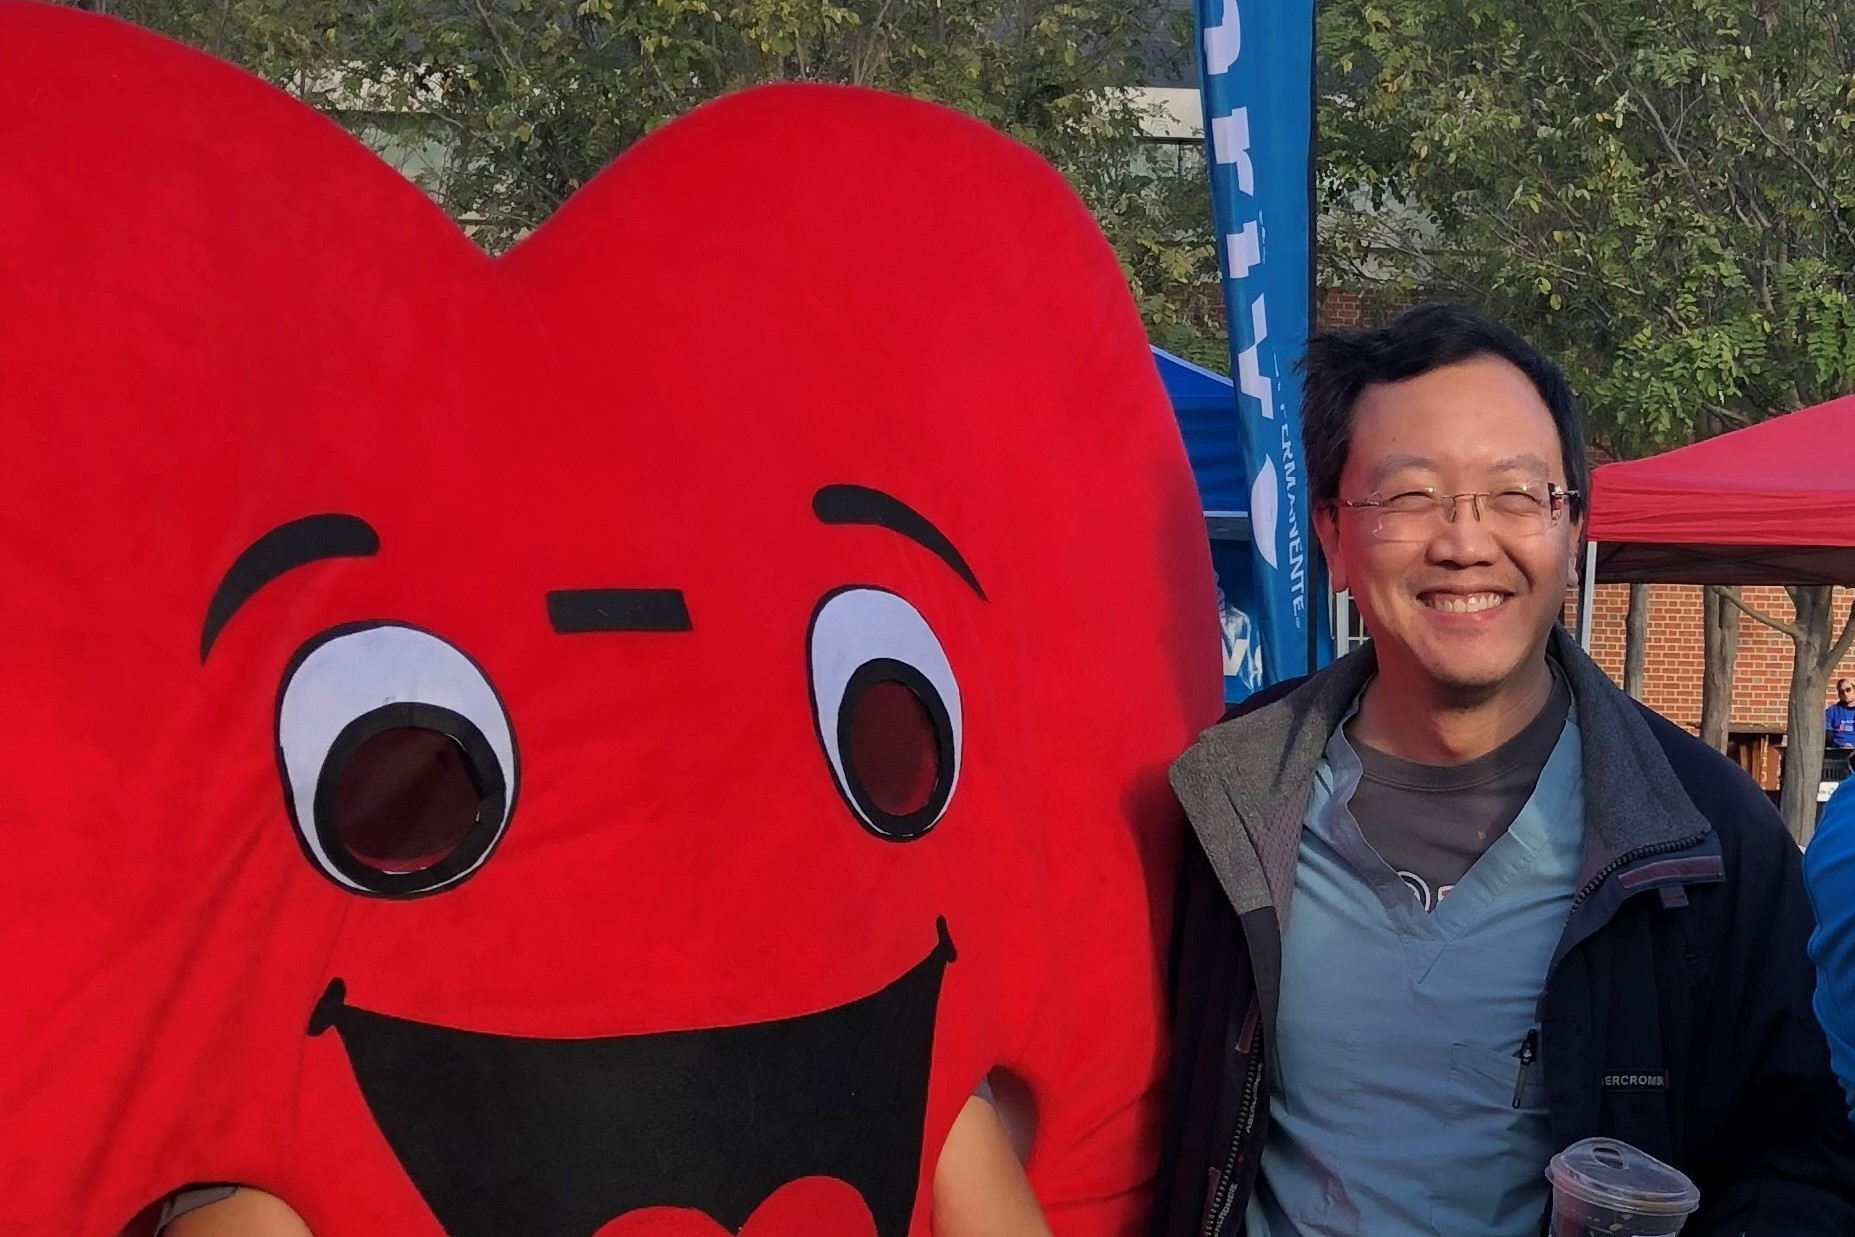 Dr. John Yeung stands next to a person-sized, smiling, red heart mascot.